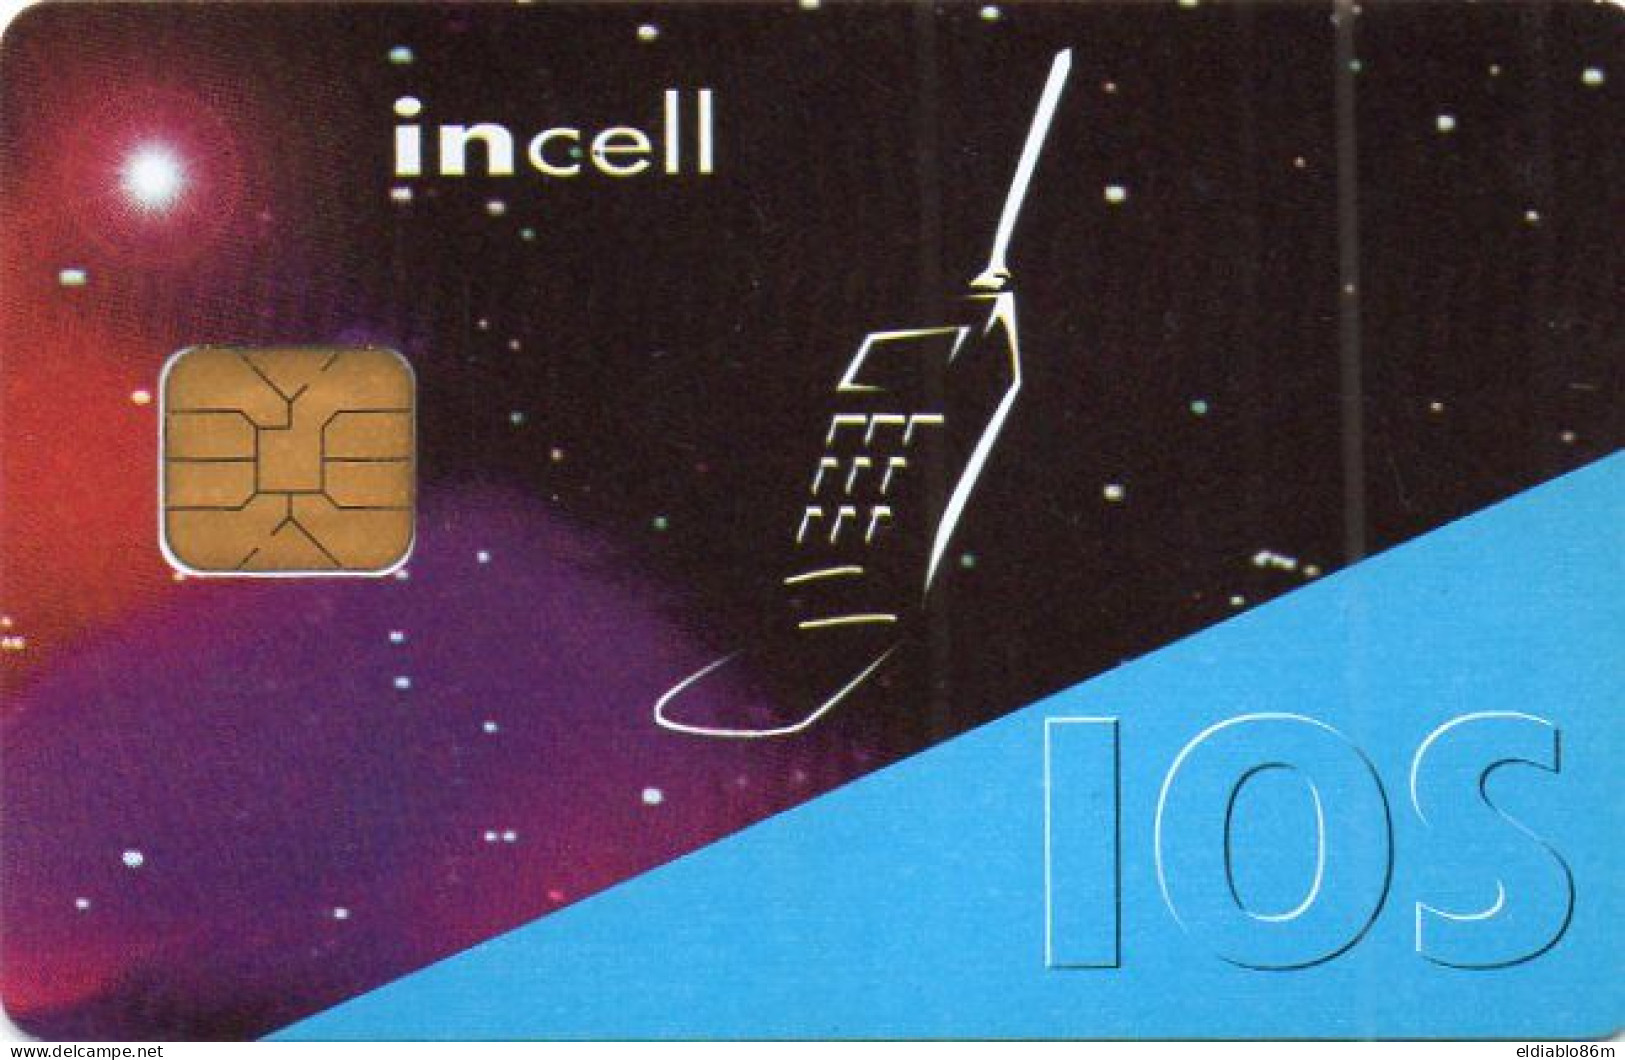 ITALY - CHIP CARD - TEST CARD - INCARD - INCELL IOS - SUBSCRIBER ID CARD BASIC - C&C 5509 - Tests & Services